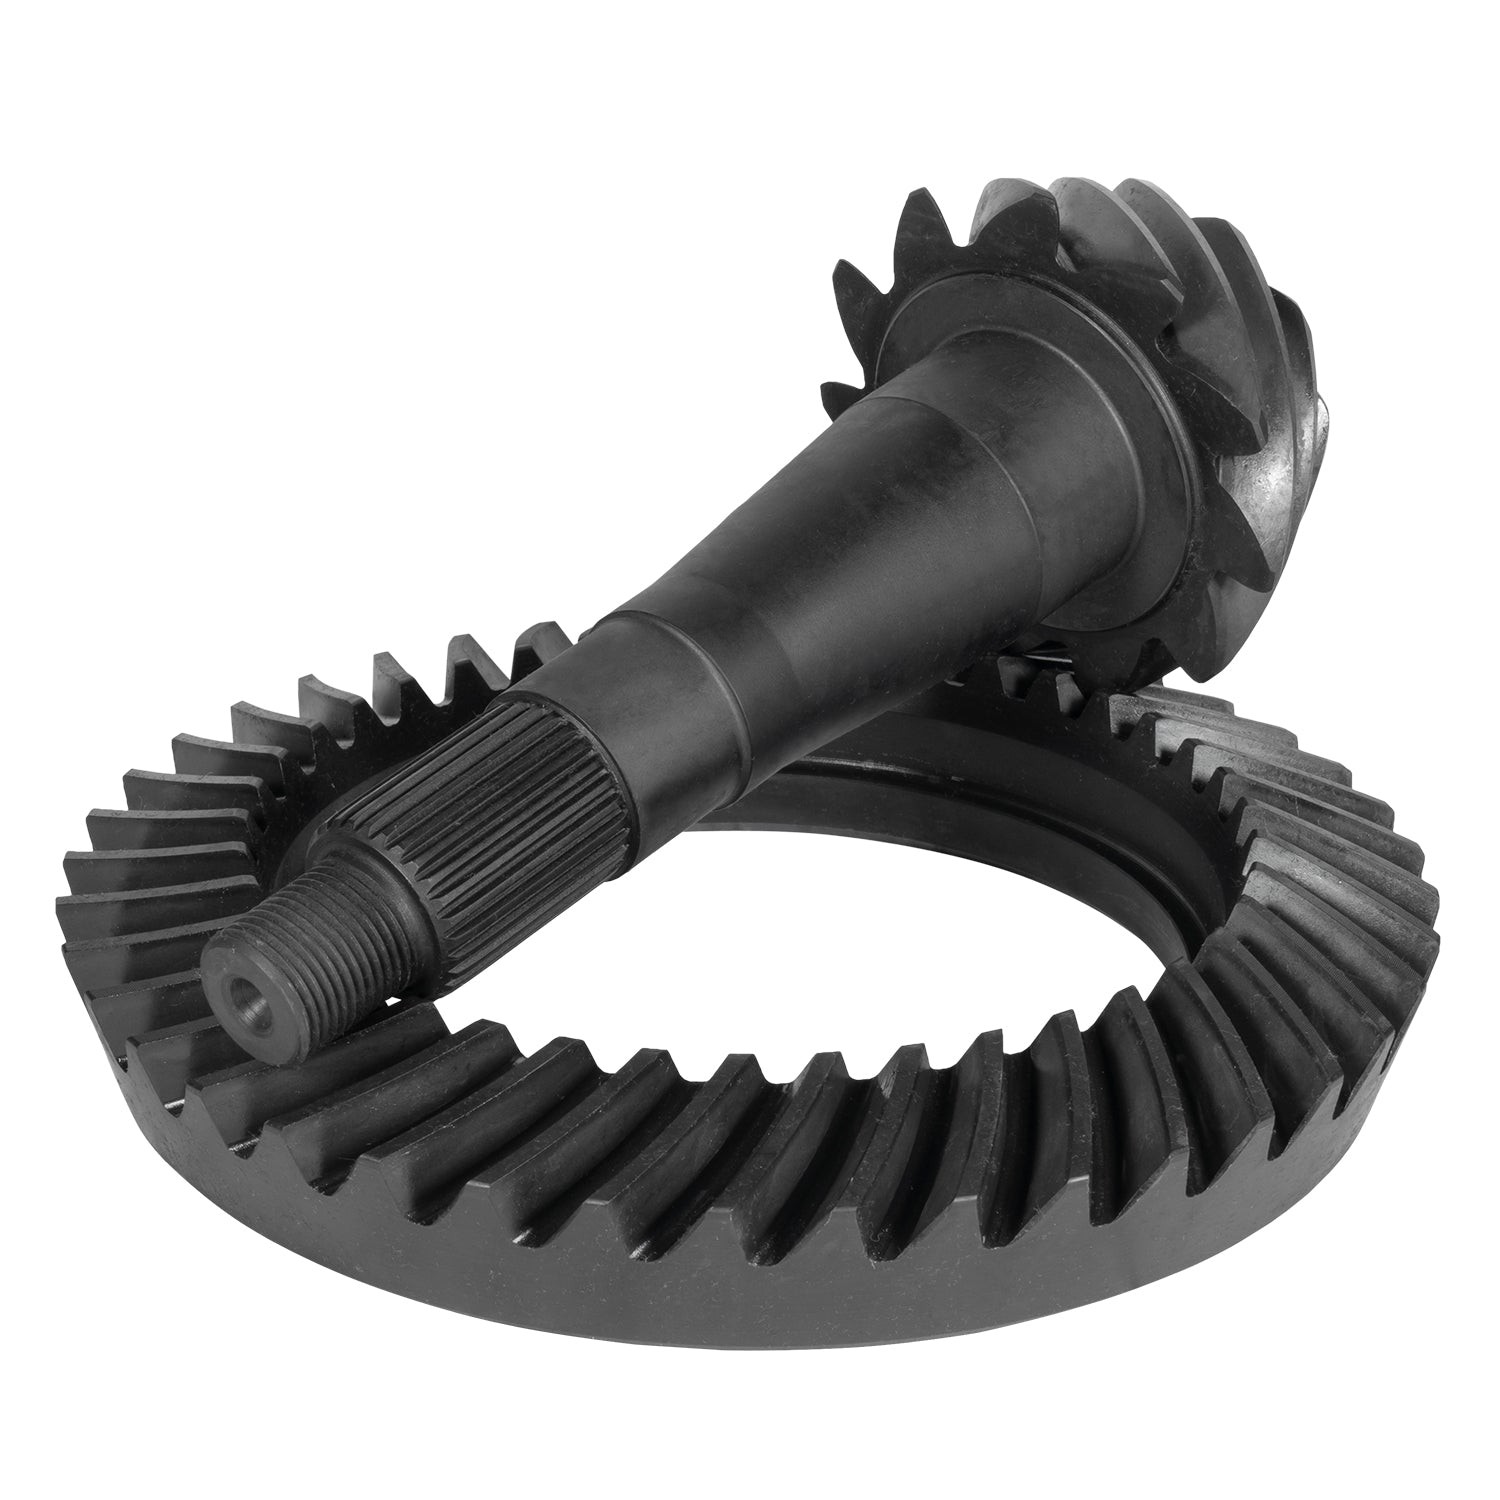 Yukon Gear Chrysler Dodge Plymouth Differential Ring and Pinion Kit - Rear YGK2385